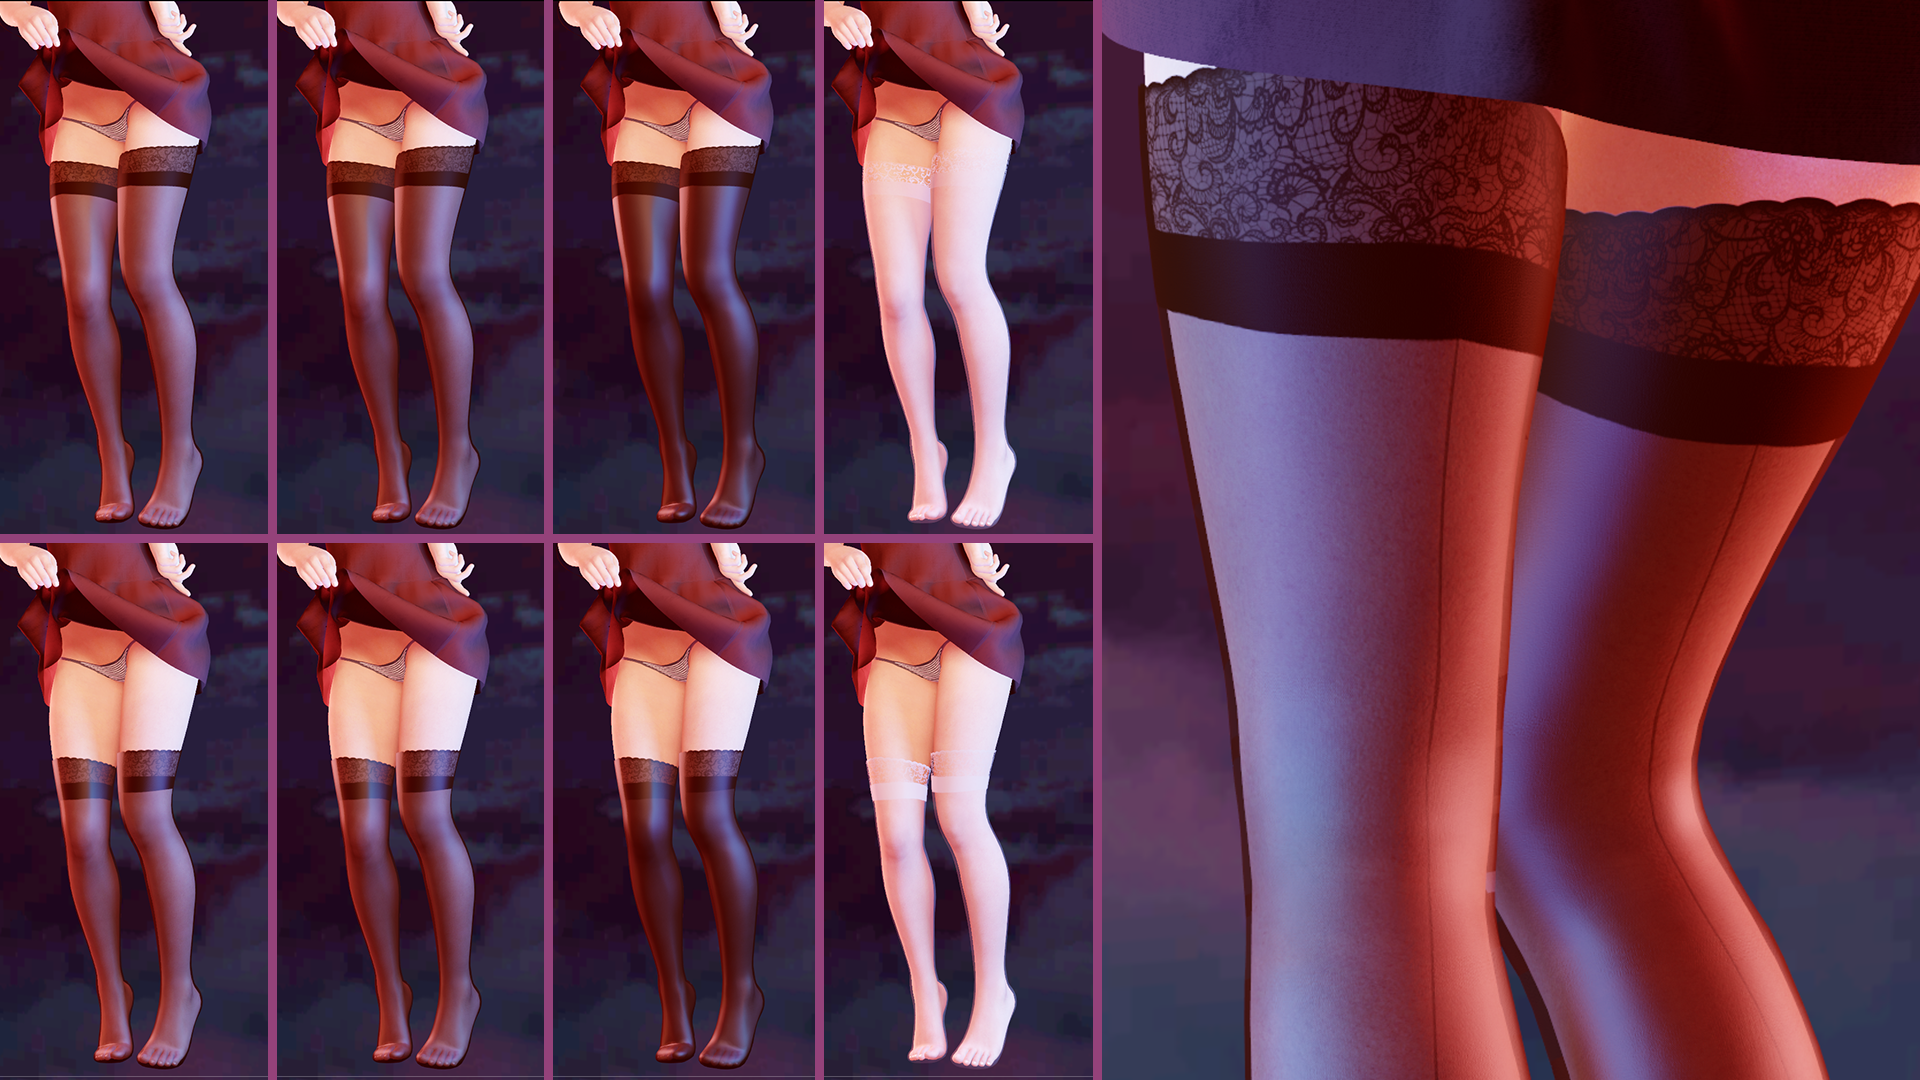 Amine Short and Long Stockings Image.png